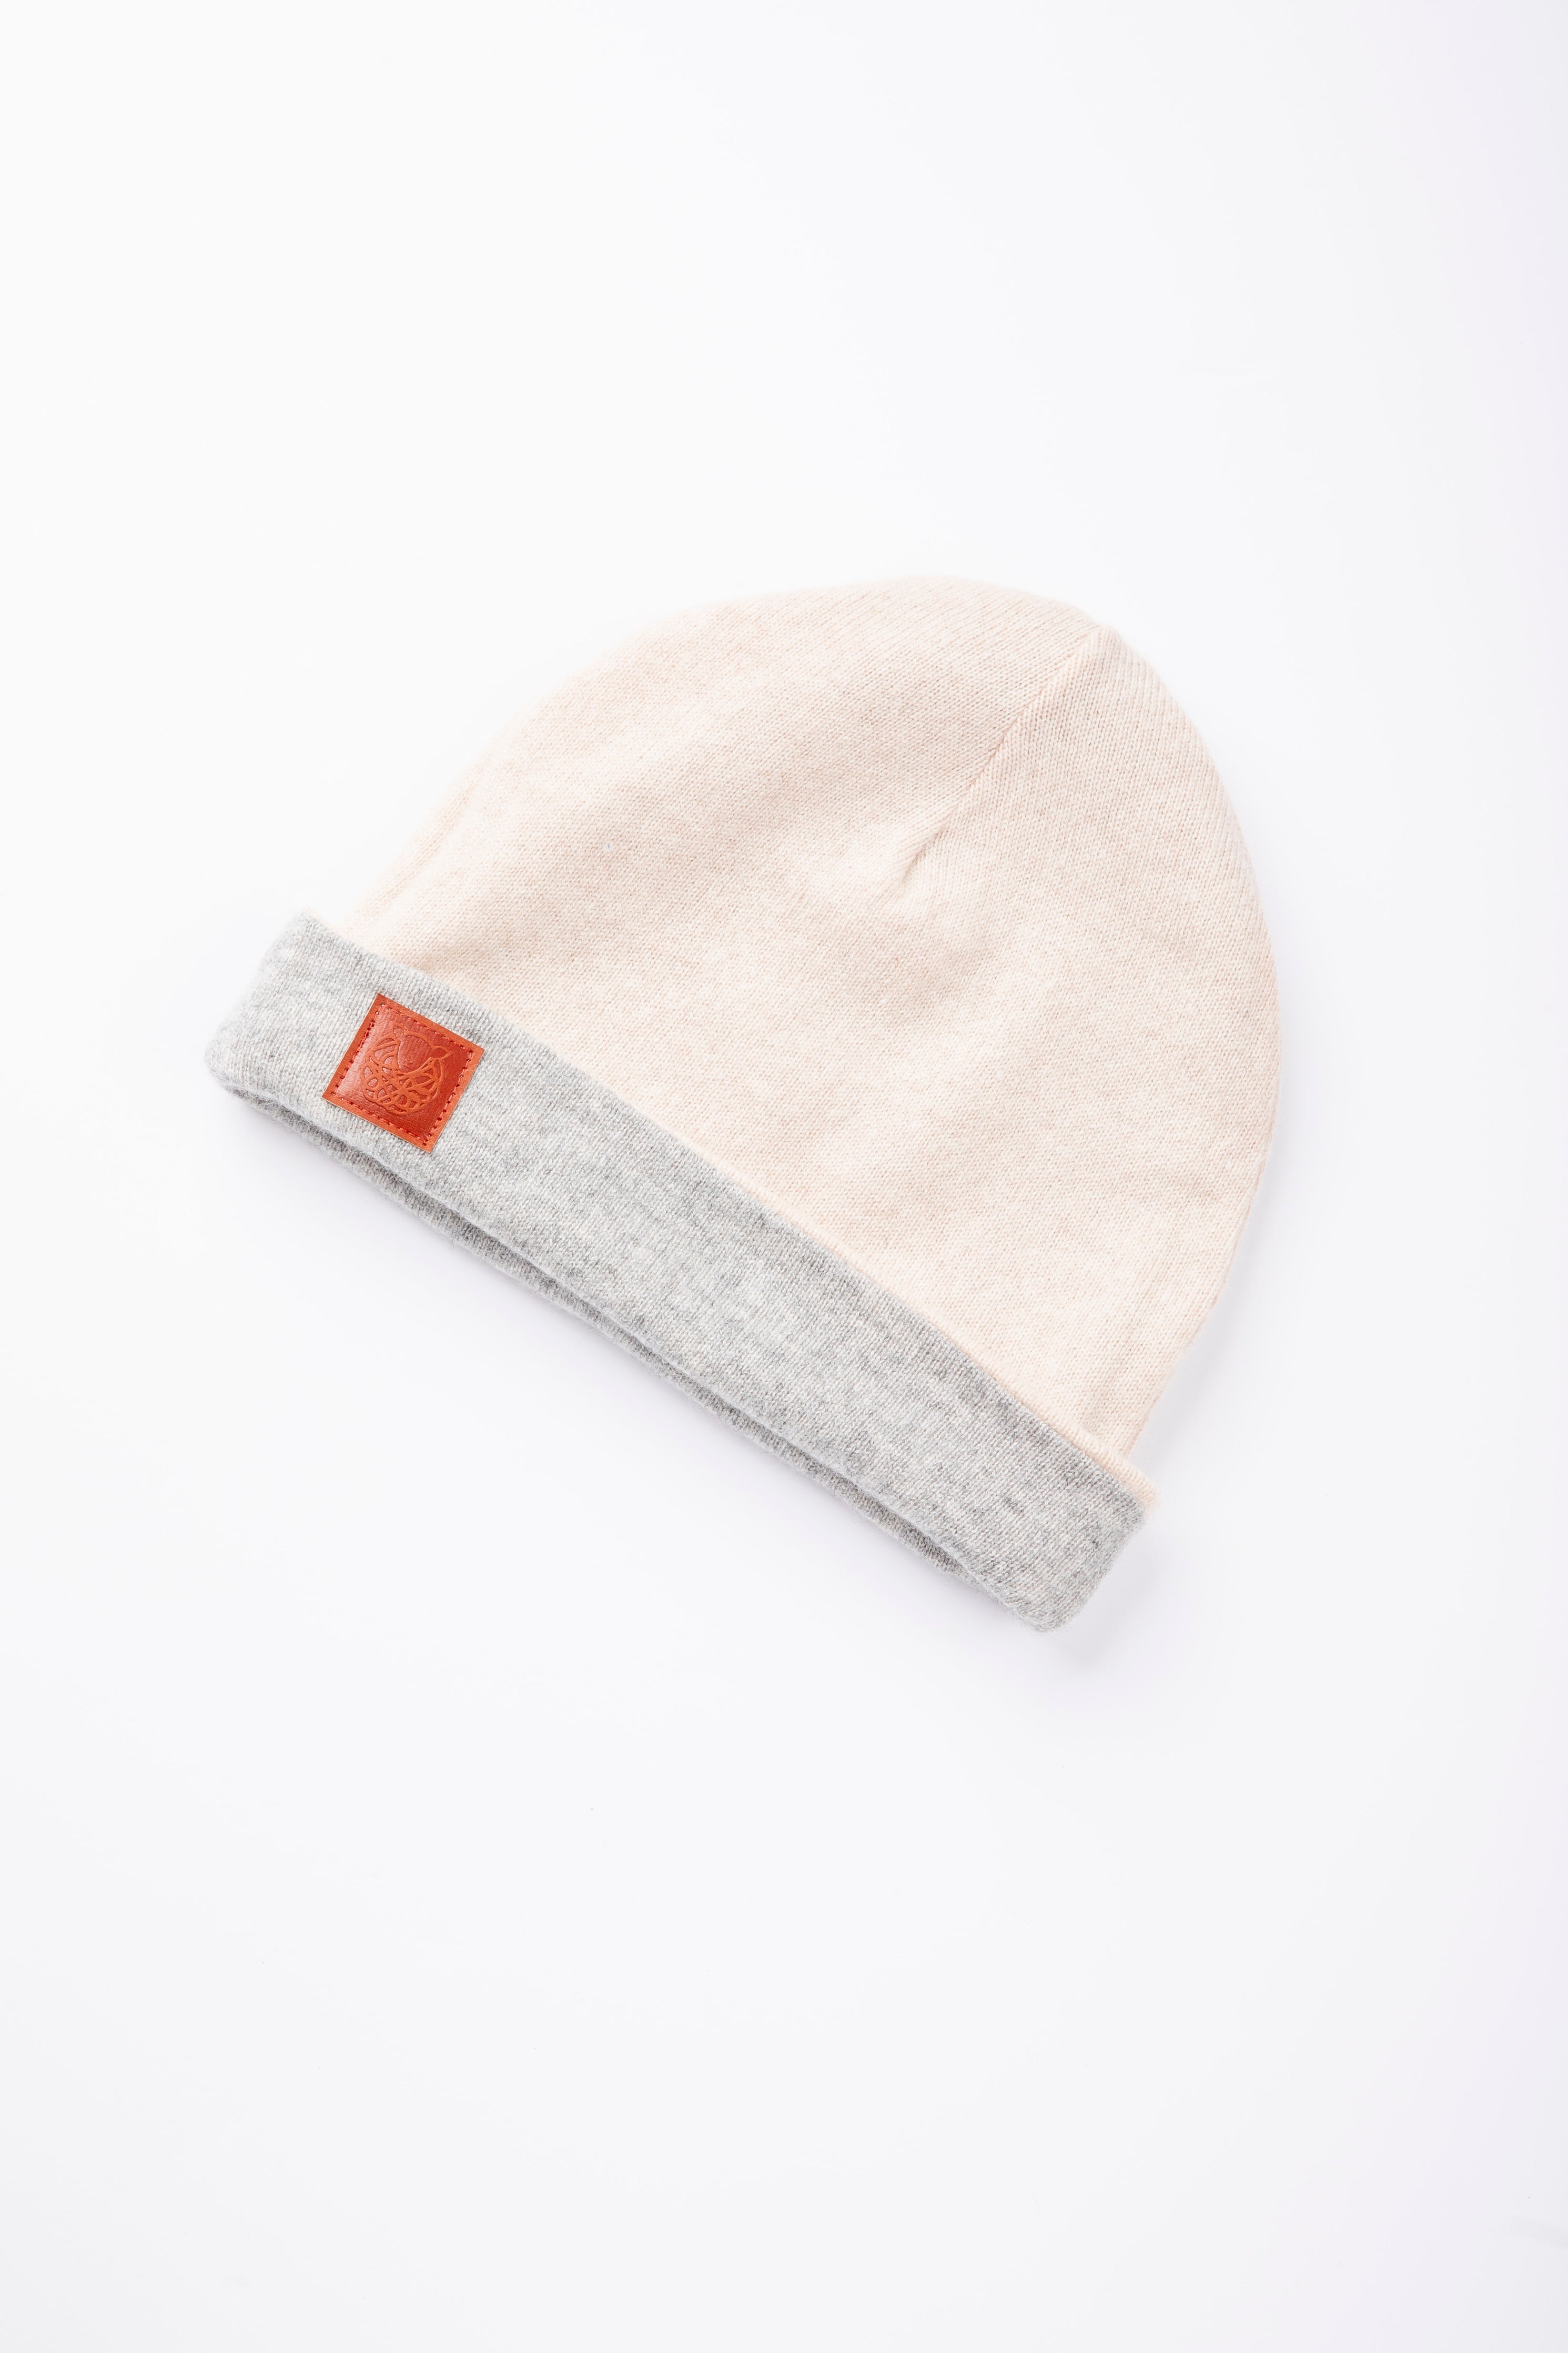 Light Gray and Light Beige - Reversible Cashmere Beanie